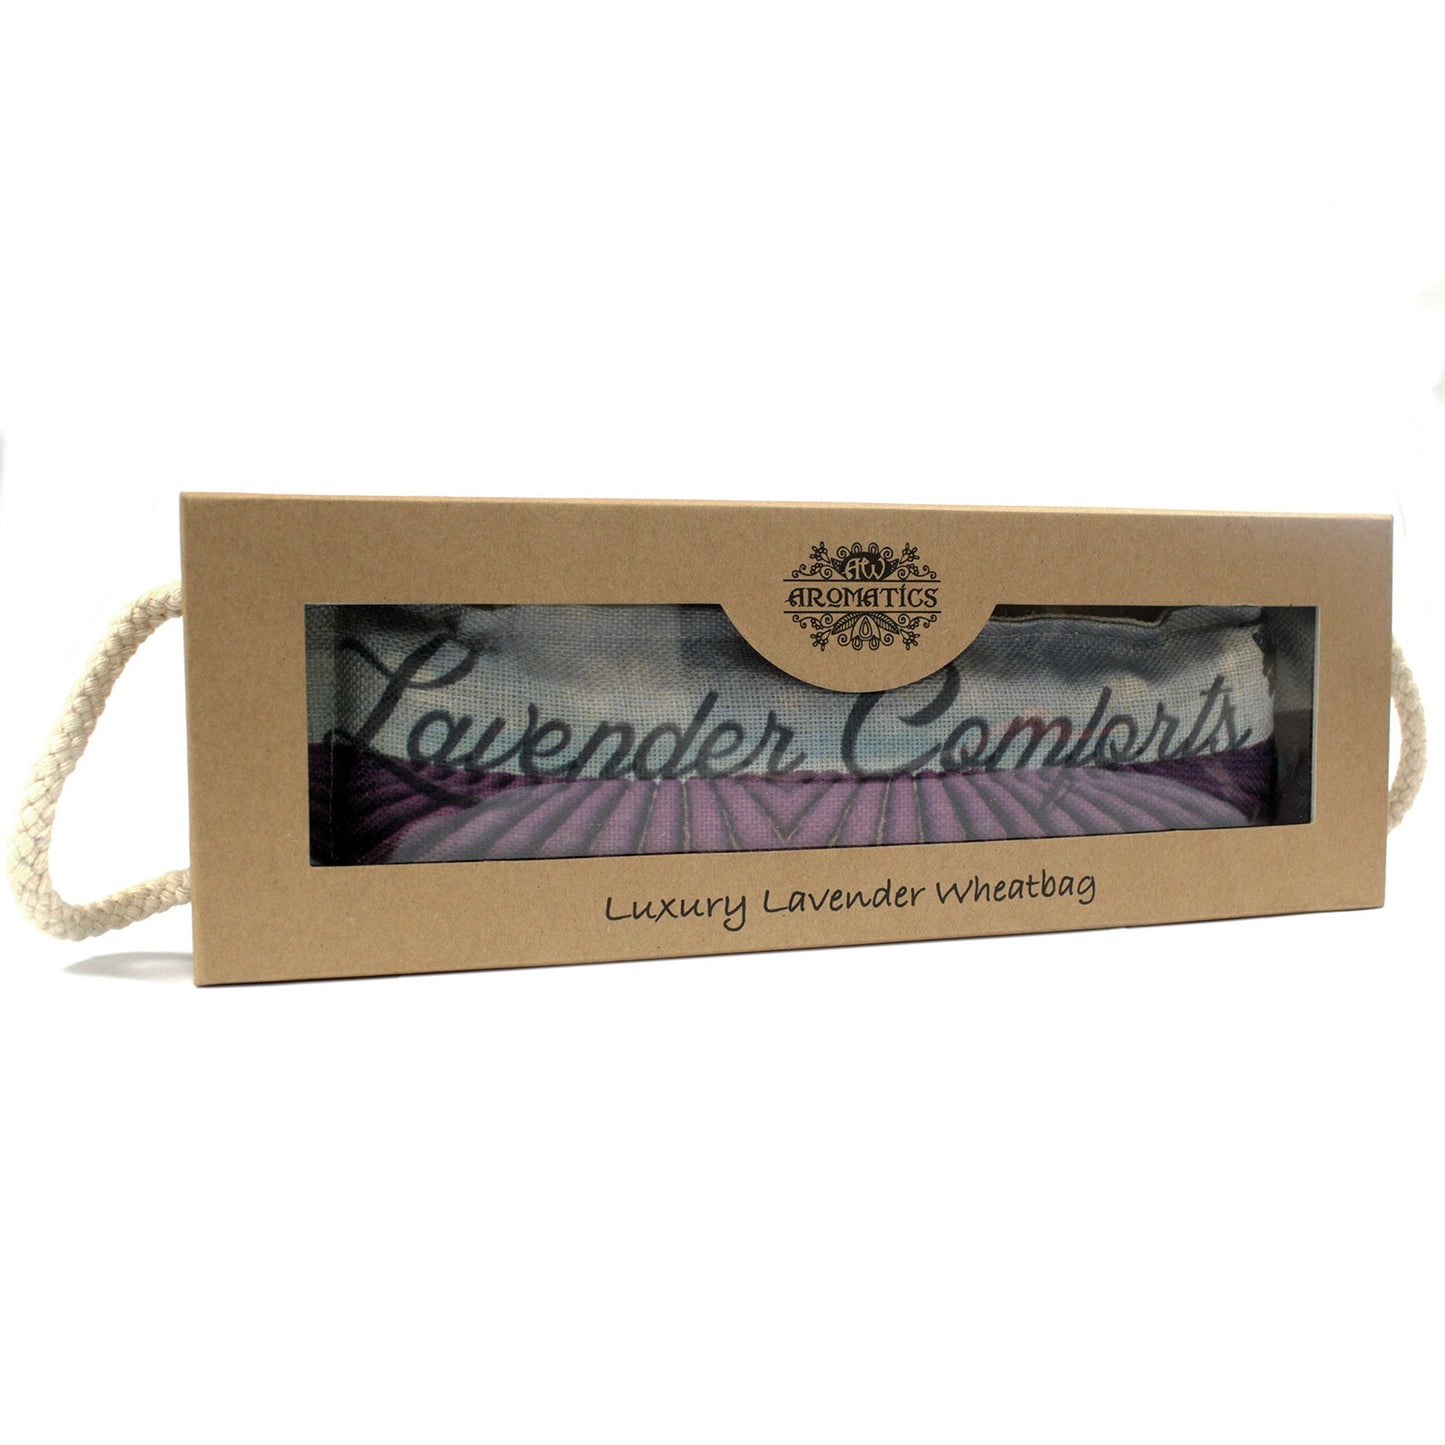 Luxury Lavender Wheat Bag in Gift Box - Lavender Comforts